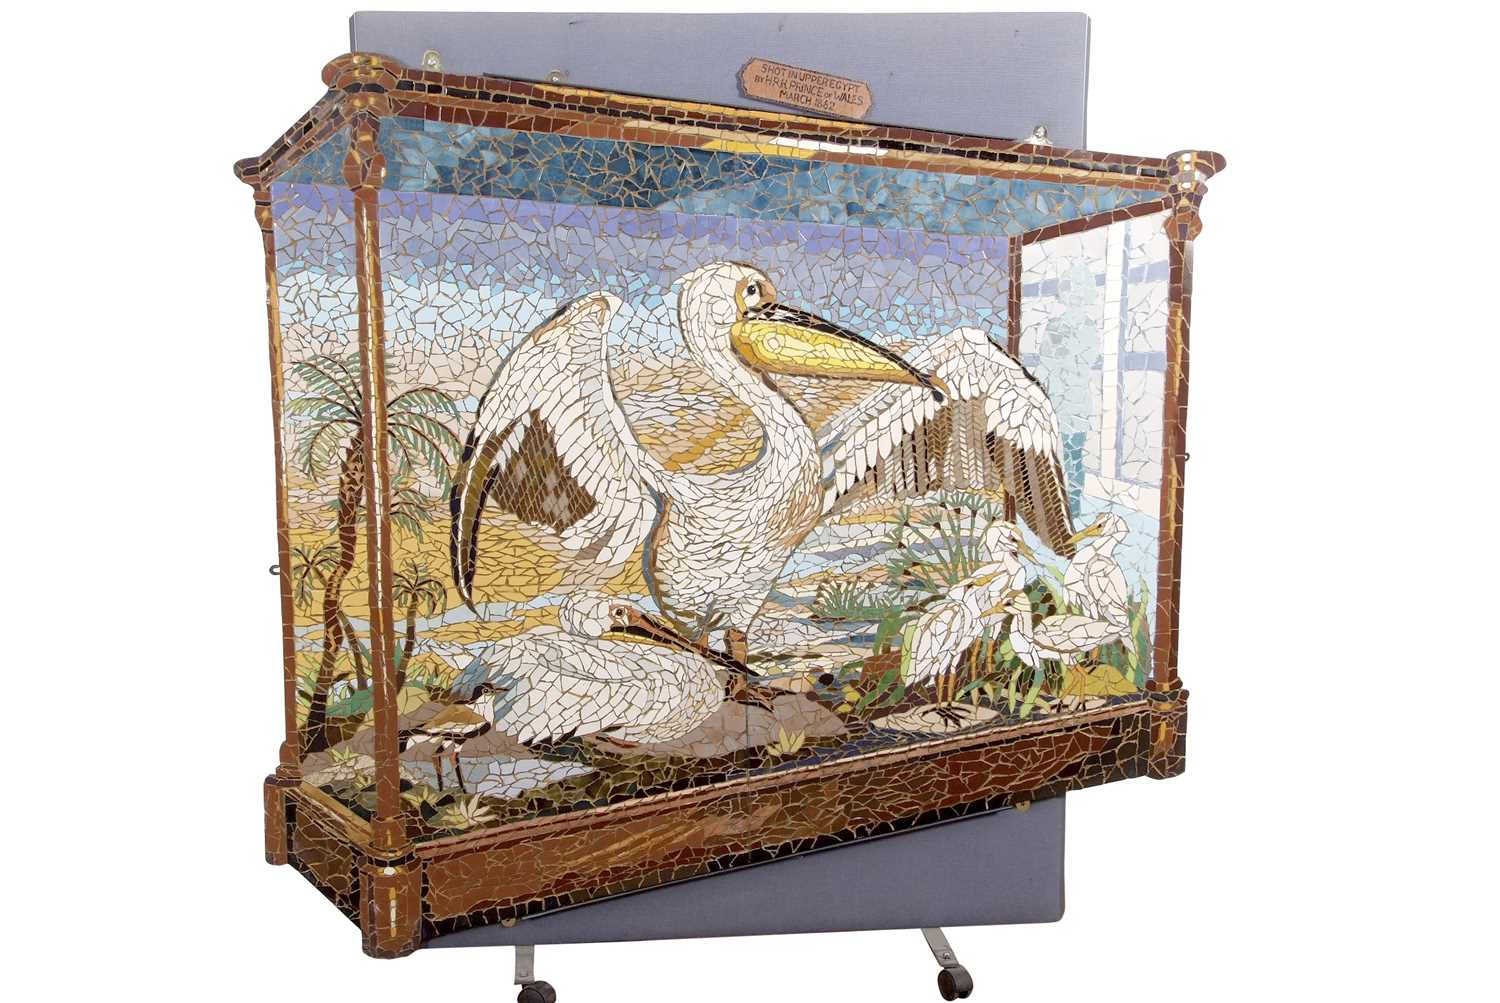 Jonathan Page (British, contemporary), "Pelican", mosaic, approx.132x156 cms, unframed. - Image 15 of 18